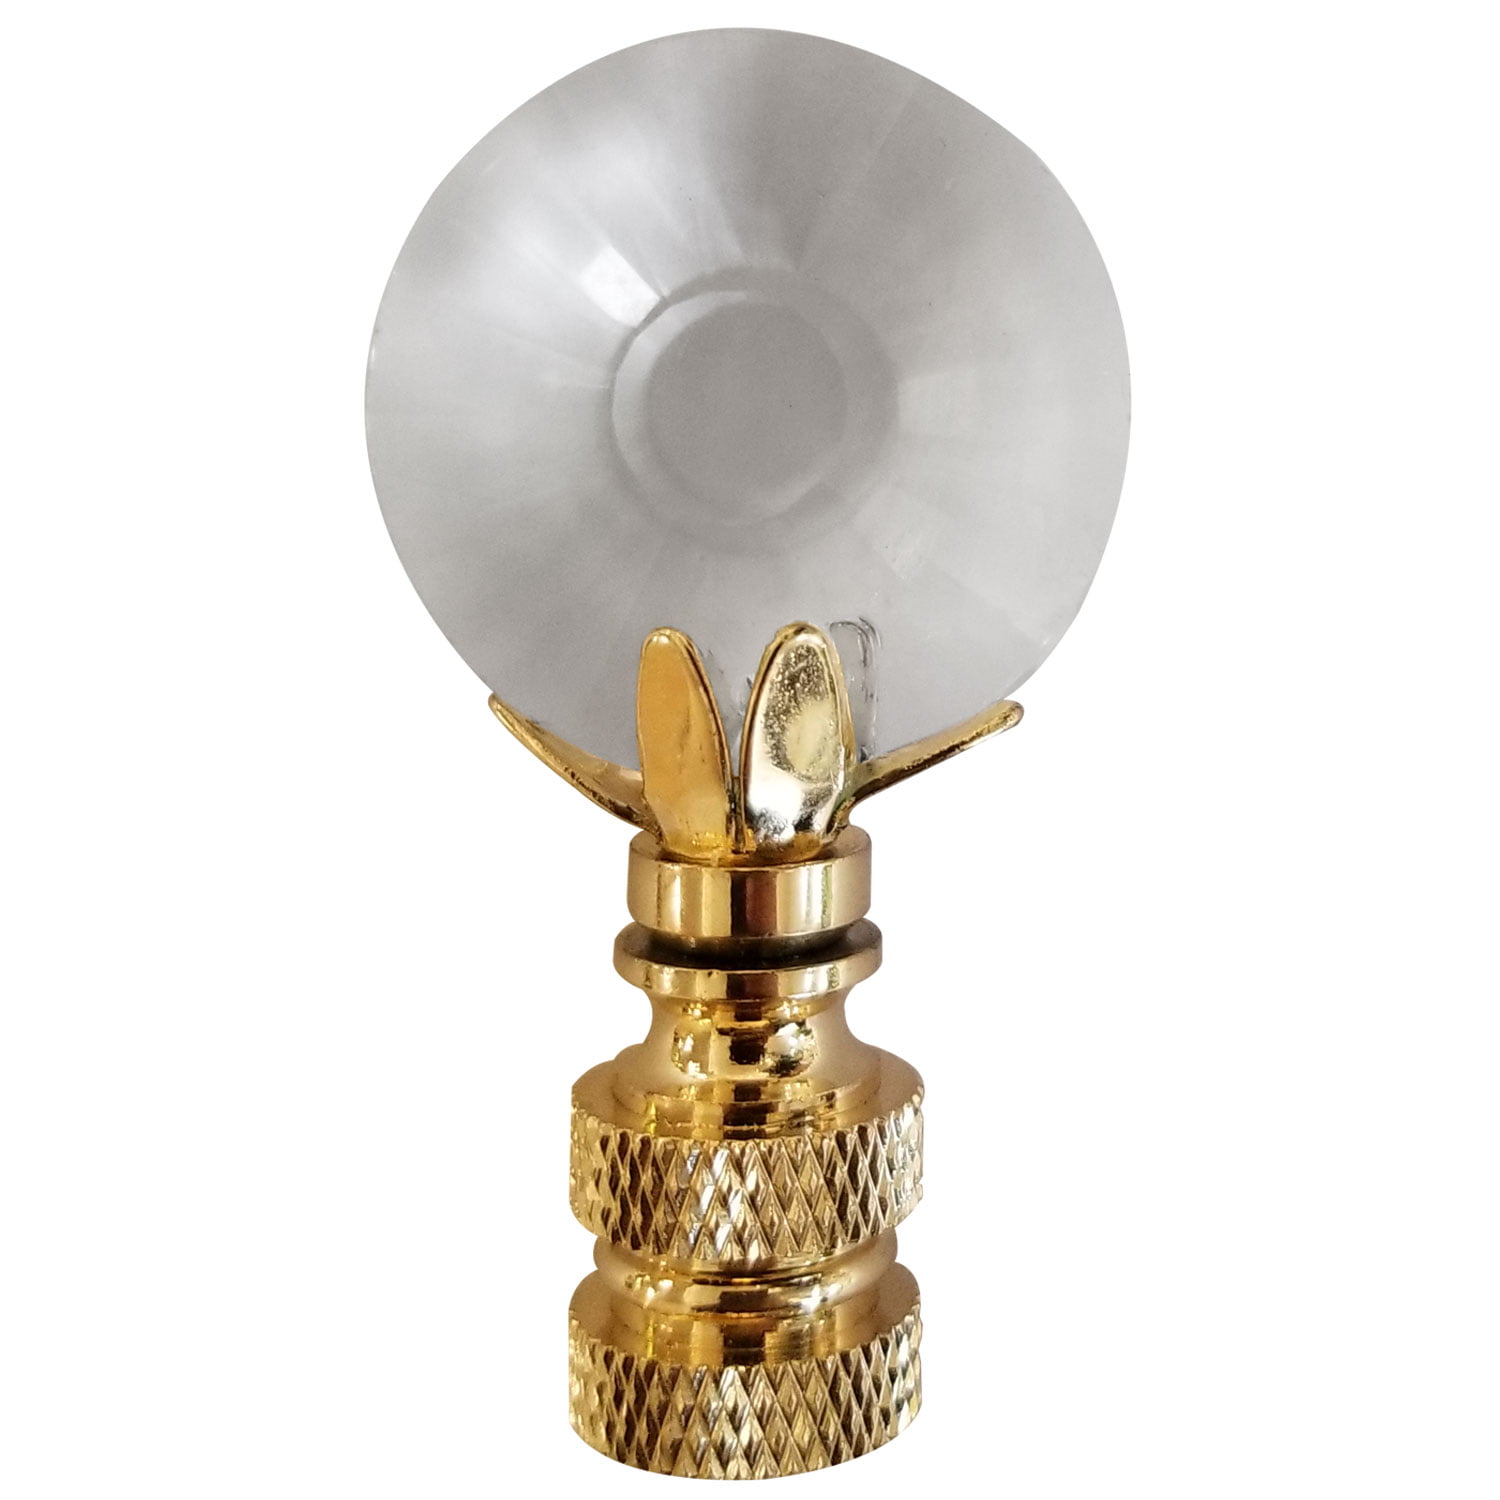 B MULTI  FACETED  LEAD  CRYSTAL  ELECTRIC  LIGHTING  LAMP  SHADE  FINIAL 